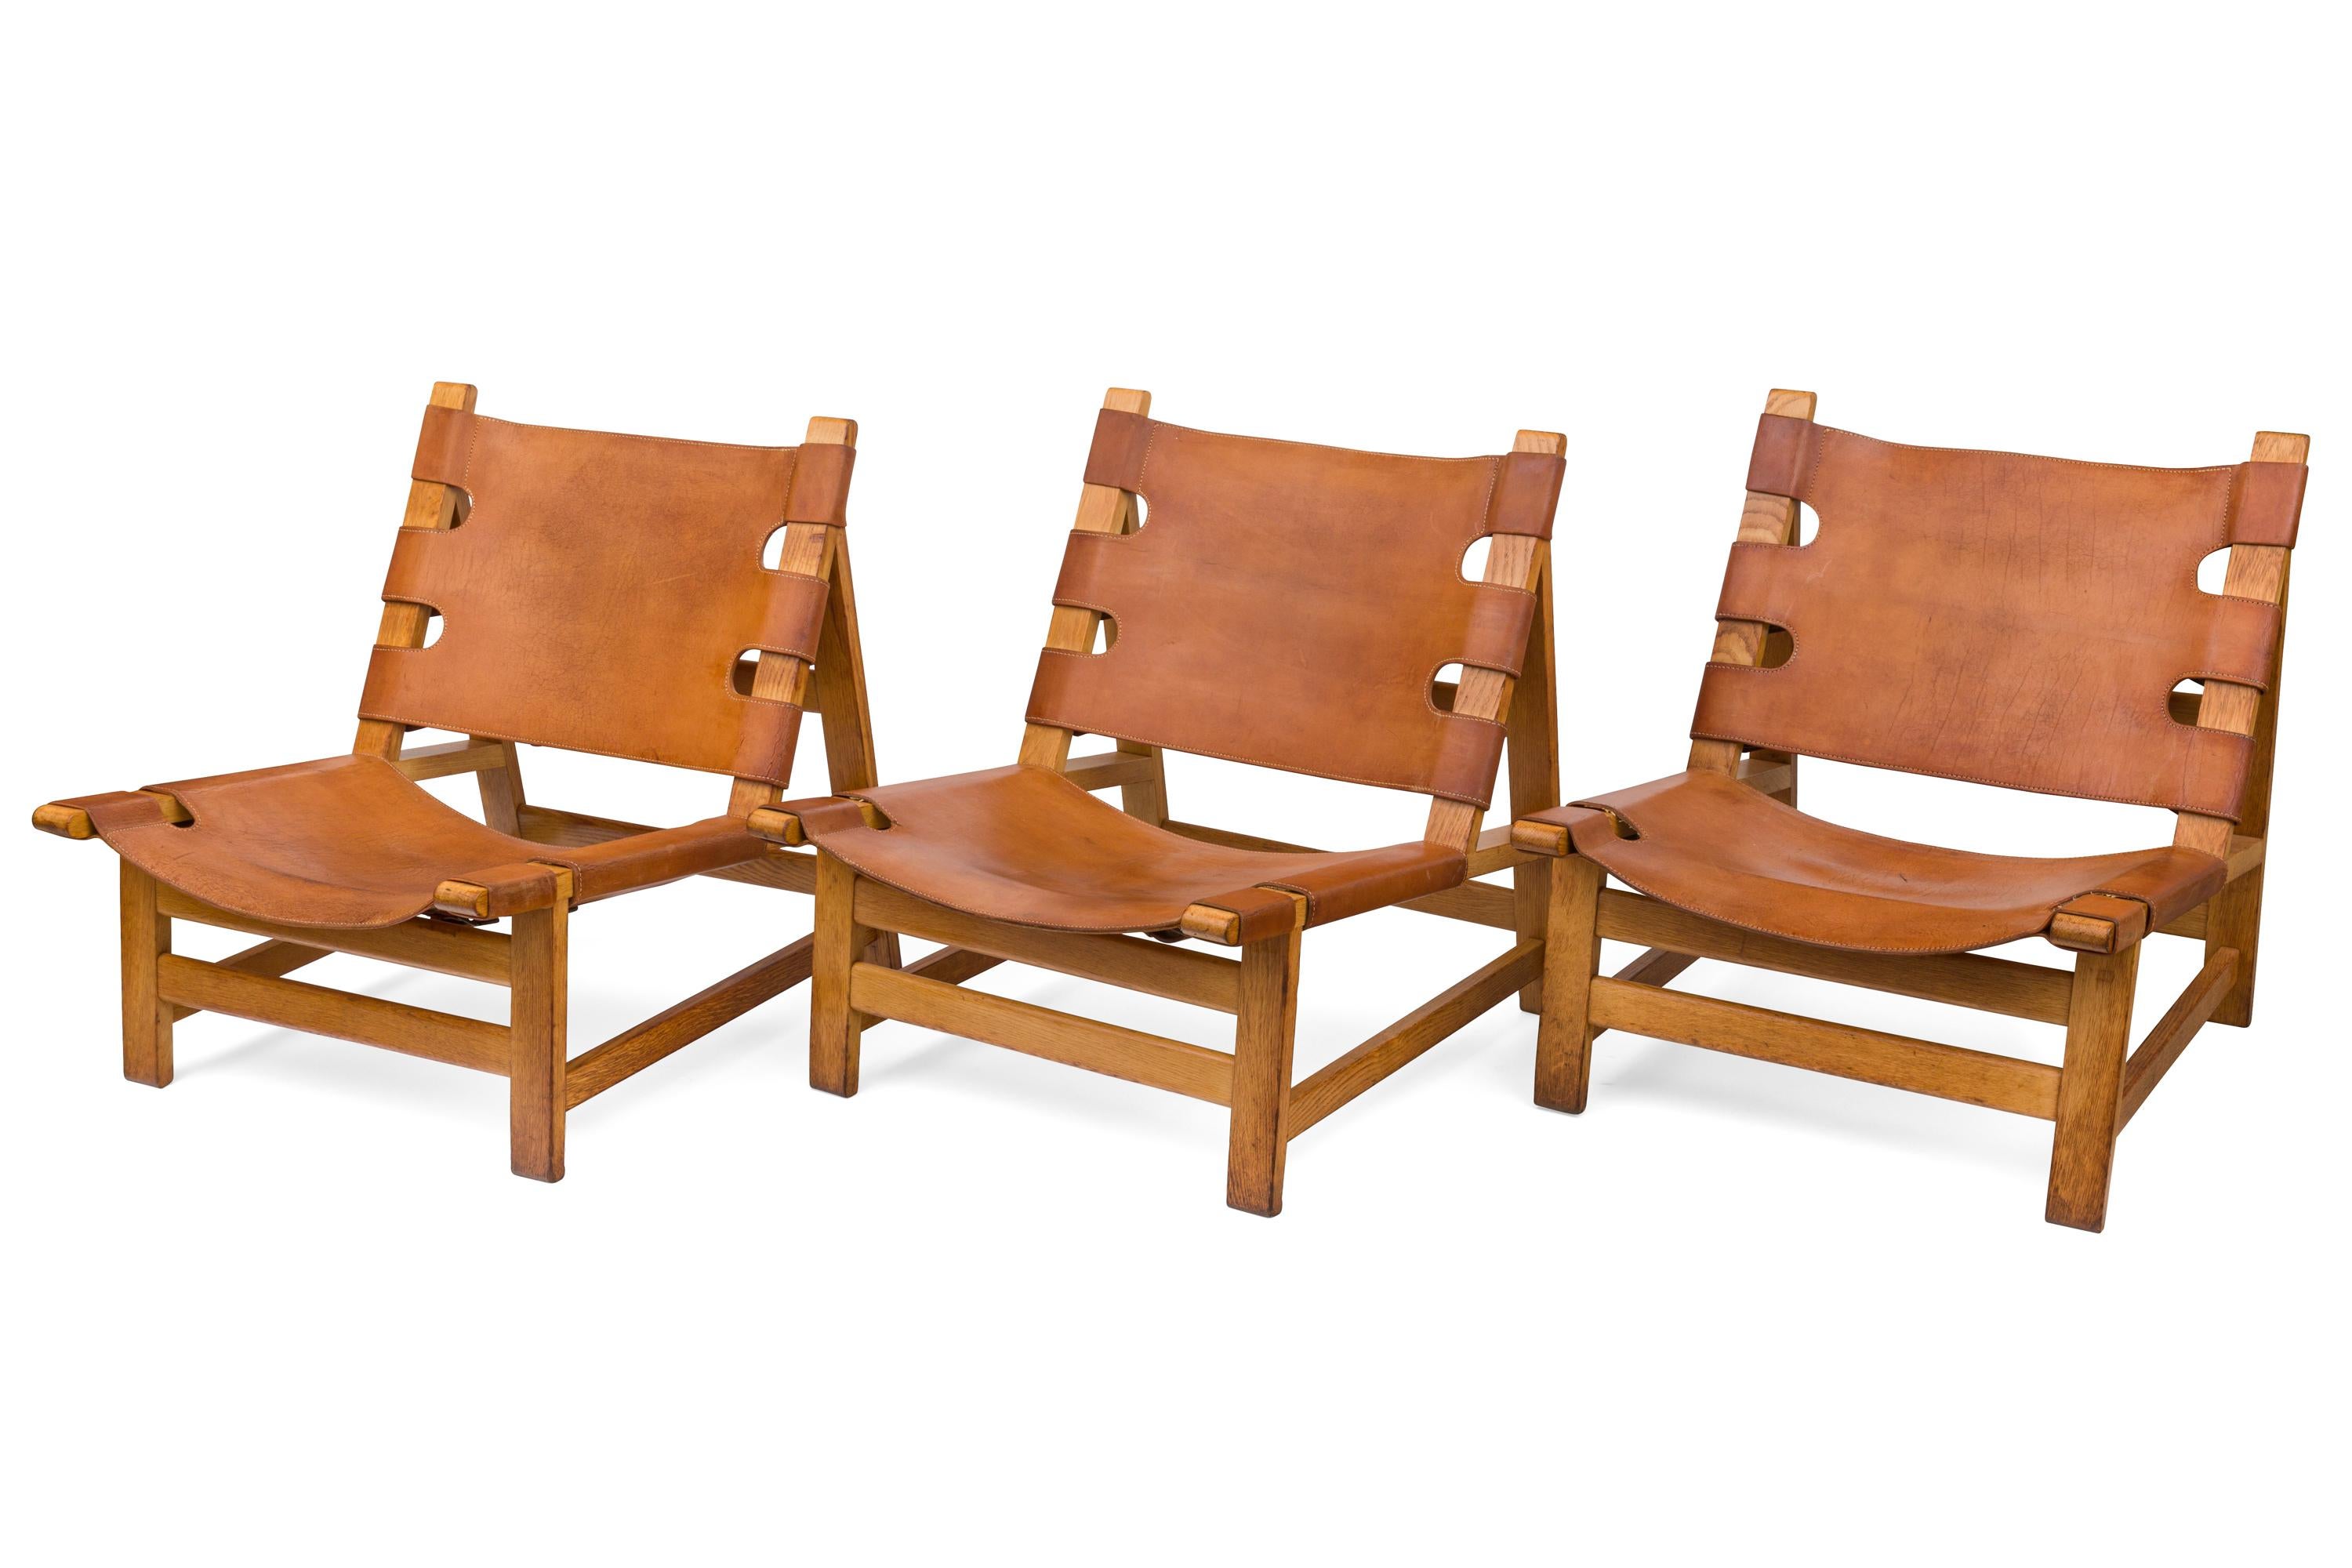 Danish Børge Mogensen Oak and Leather Lounge Chairs, Denmark, 1960s For Sale